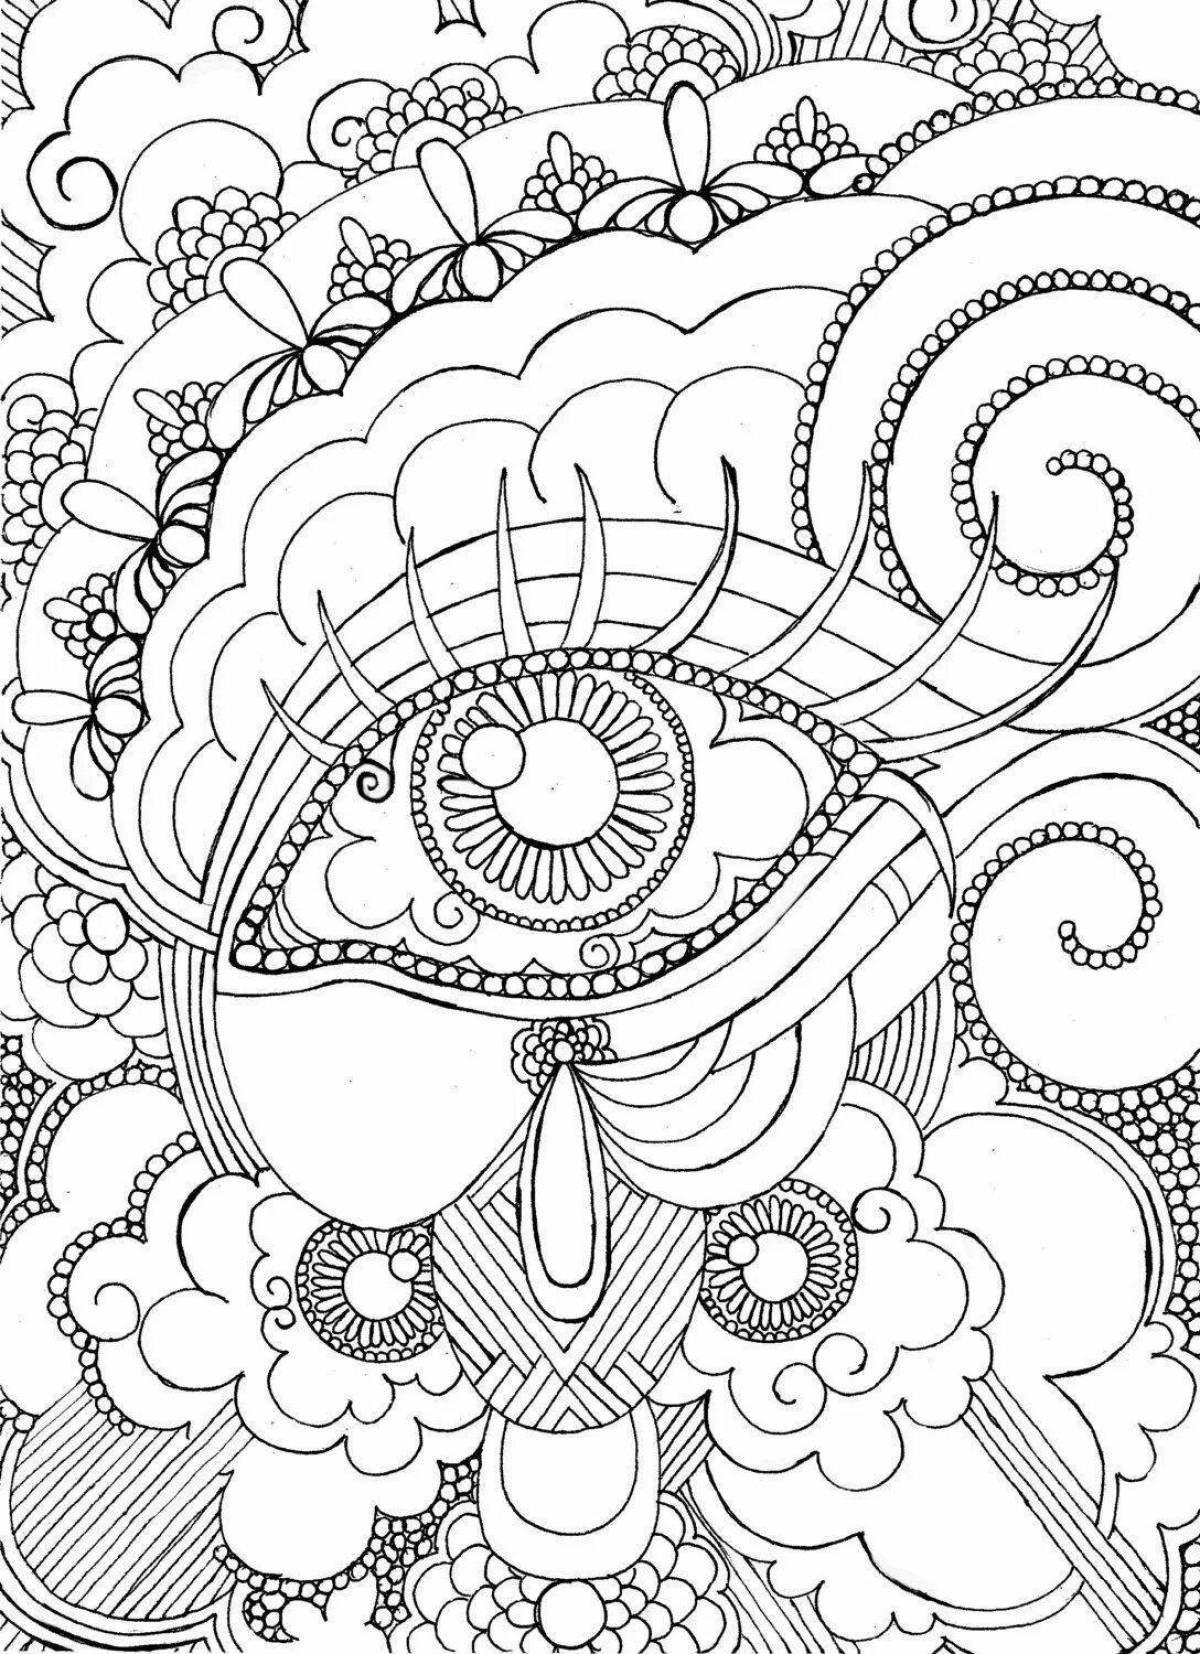 Nerve involvement coloring page